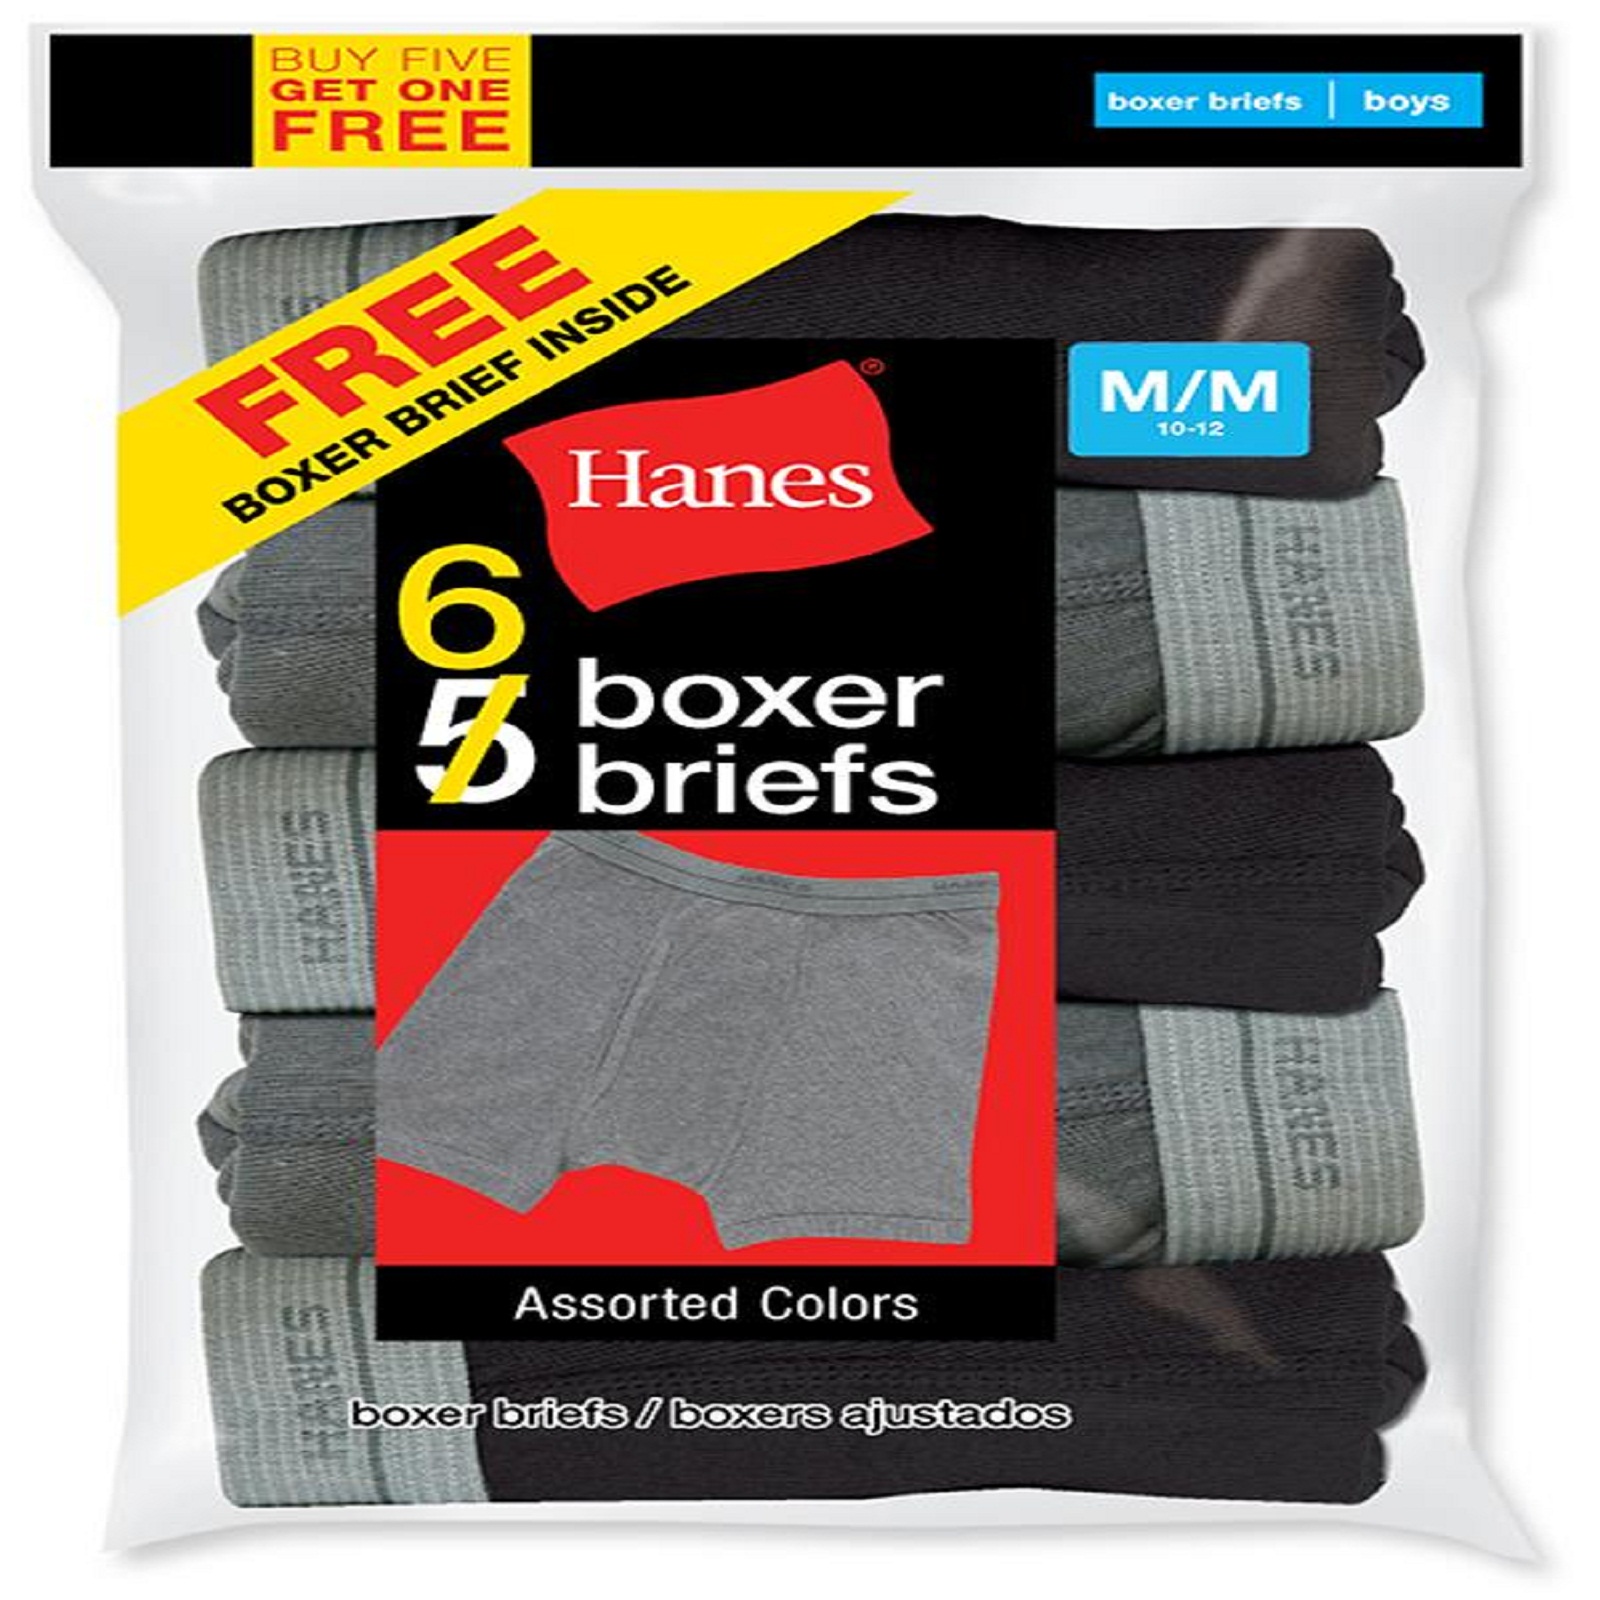 Hanes Boy's 6-Pack Boxer Briefs - Assorted Colors